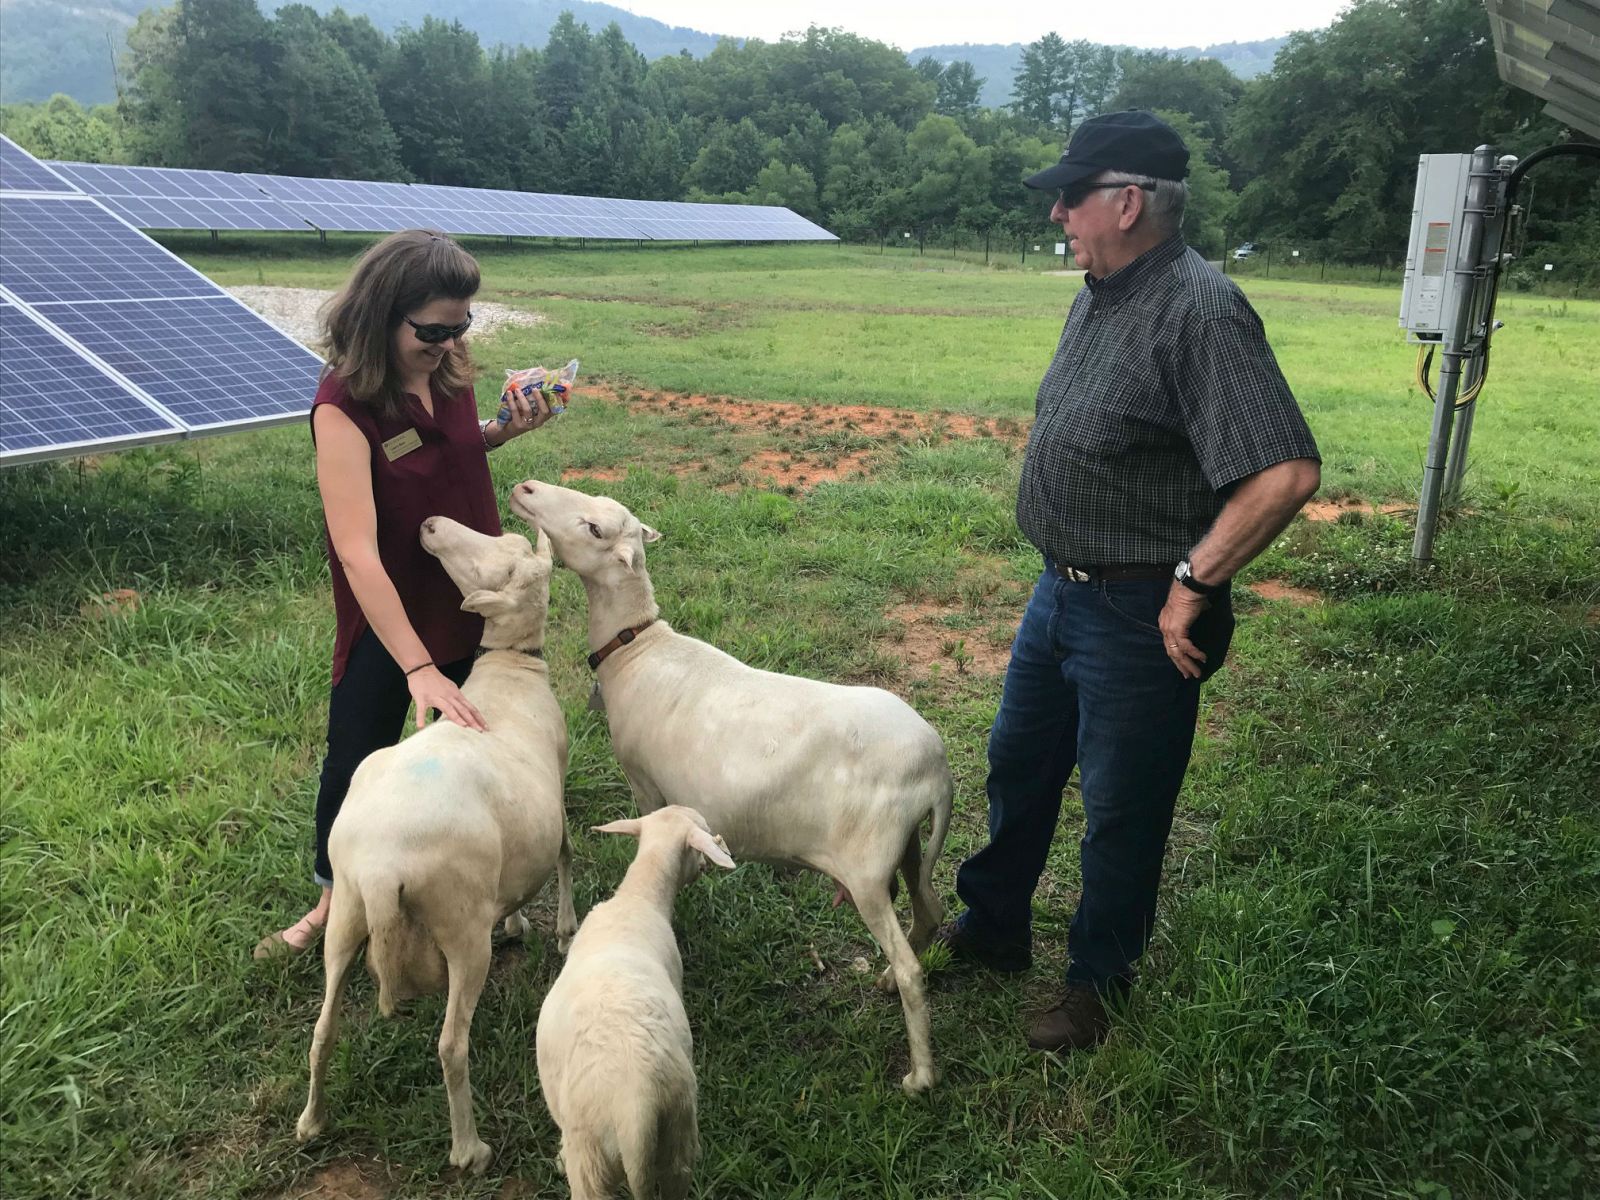 Laura Bain, associate director of sustainability assessment for the Shi Center for Sustainability at Furman, along with farmer Steve Wood, said the university is in the early stages of determining how many sheep the university may need to maintain the grass at the solar farm. (Photo/Teresa Cutlip)